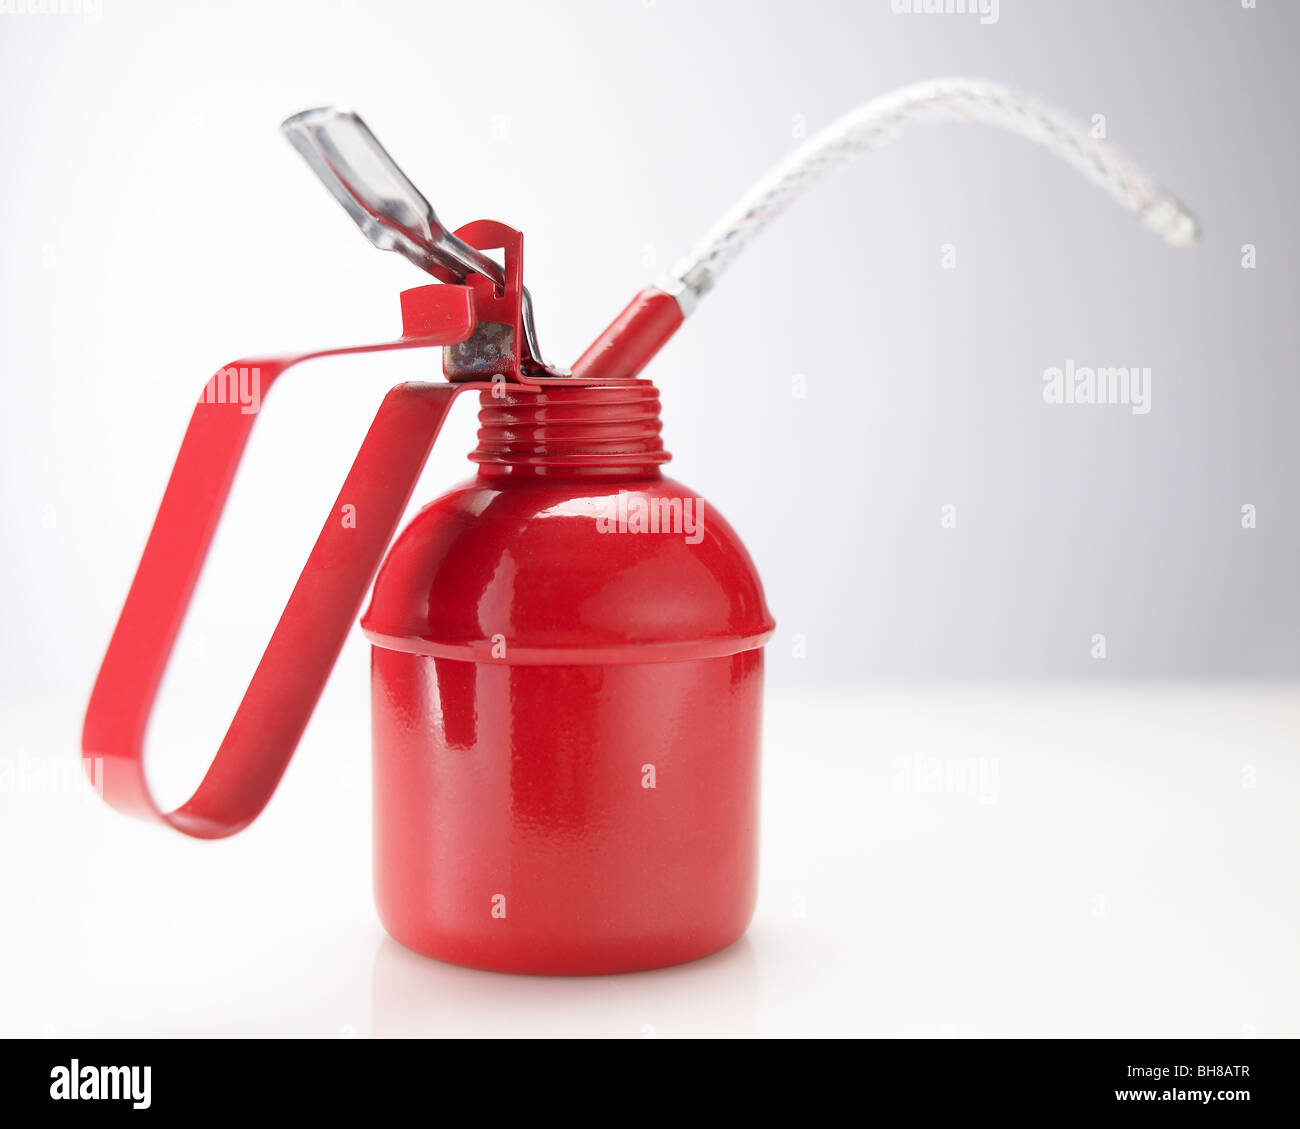 Traditional red oil can on a white background Stock Photo